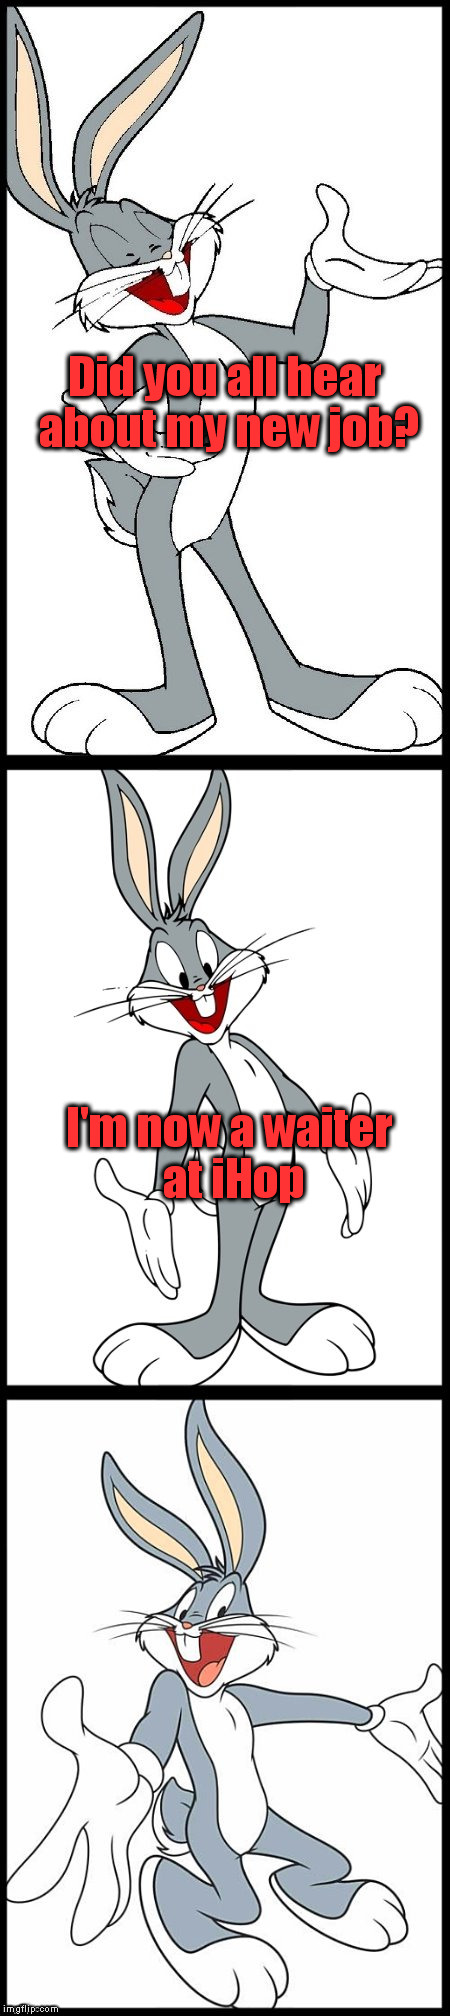 Bugs in the workforce now | Did you all hear about my new job? I'm now a waiter at iHop | image tagged in bad bugs bunny pun | made w/ Imgflip meme maker